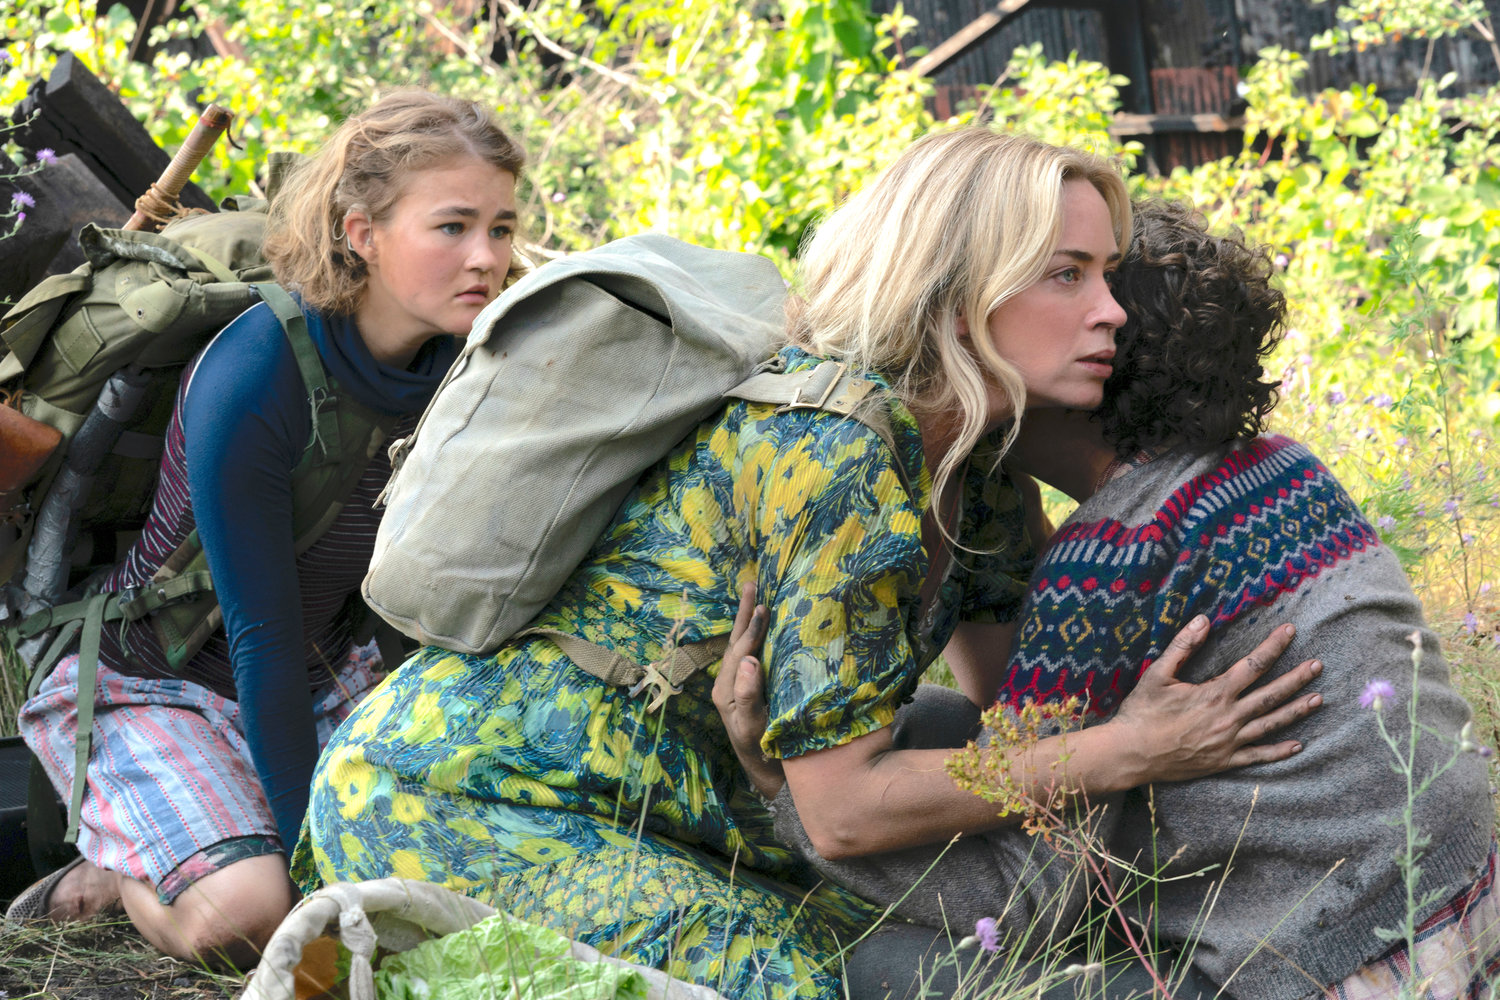 HORROR SEQUEL— From left, Millicent Simmonds as Regan, Emily Blunt as Evelyn and Noah Jupe as Marcus in a scene from “A Quiet Place Part II.”